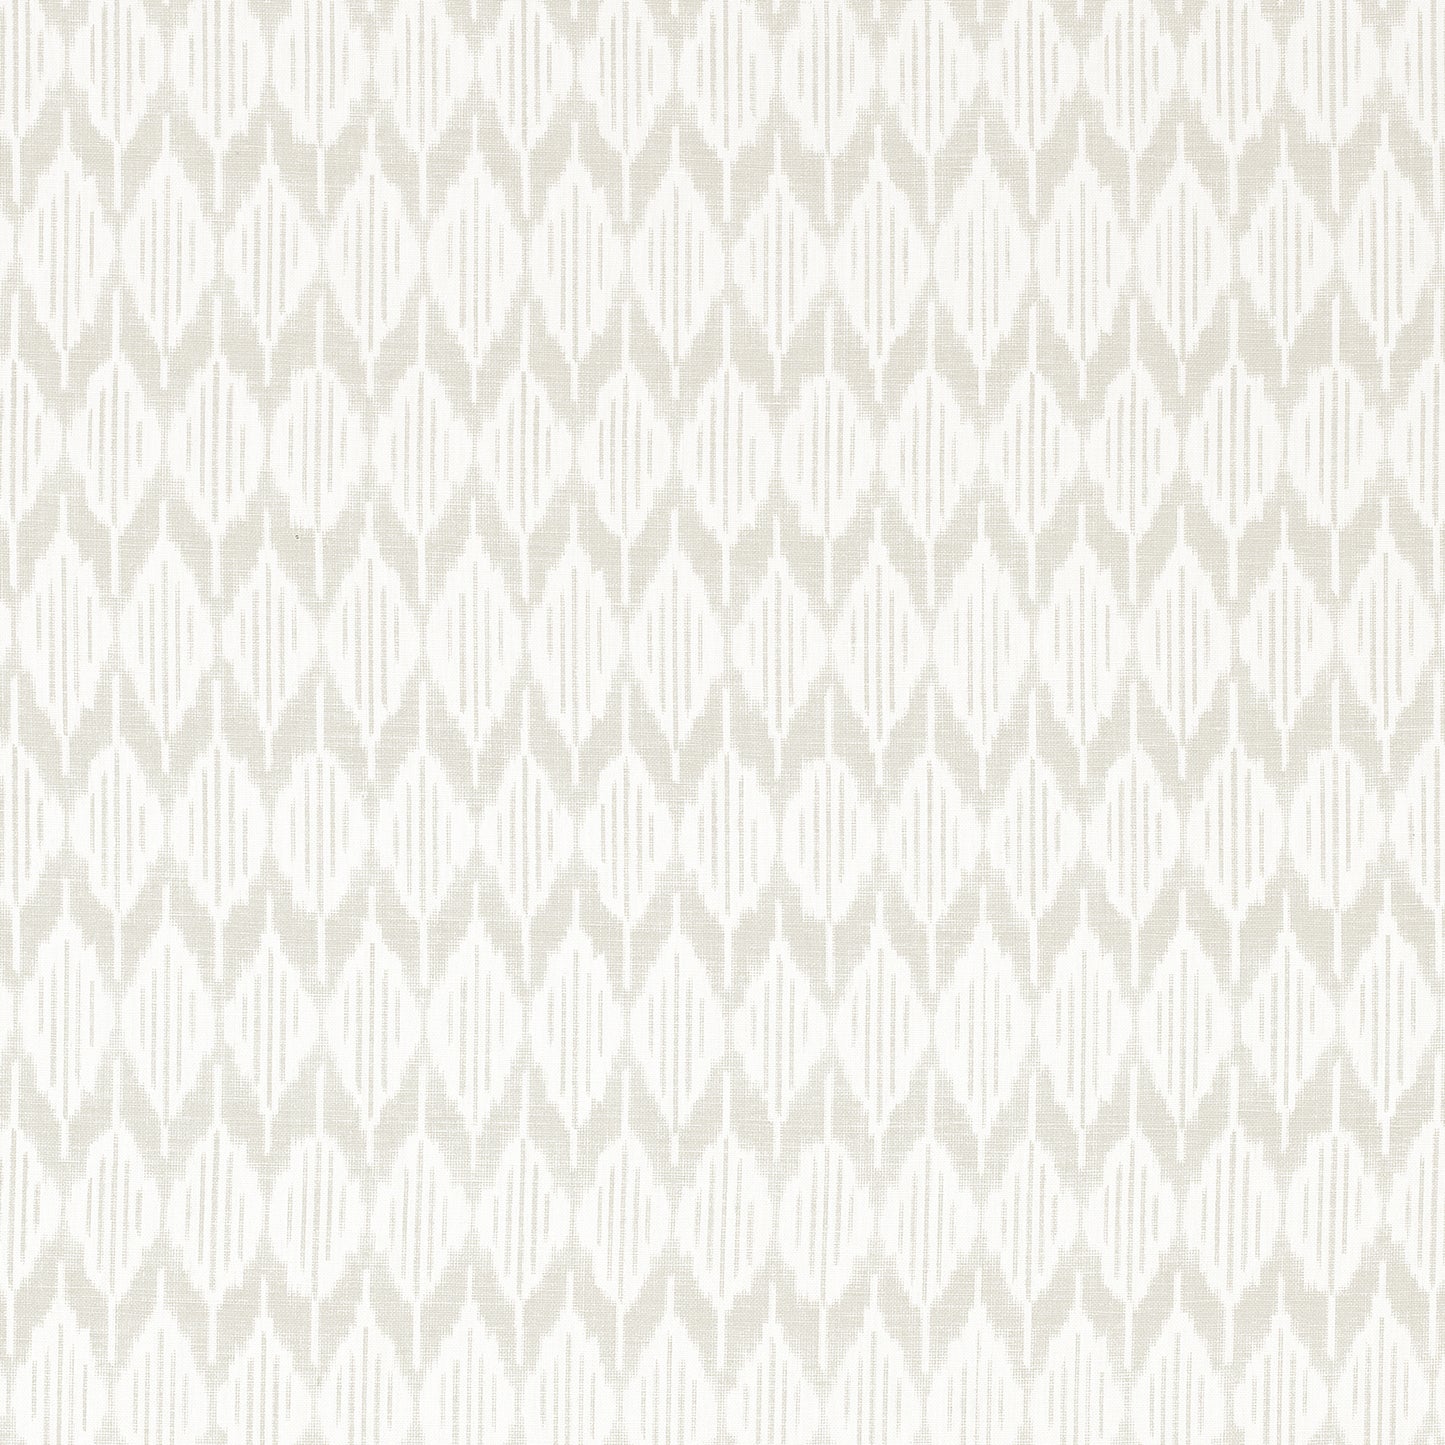 Purchase  Ann French Fabric Pattern number AF73021  pattern name  Balin Ikat